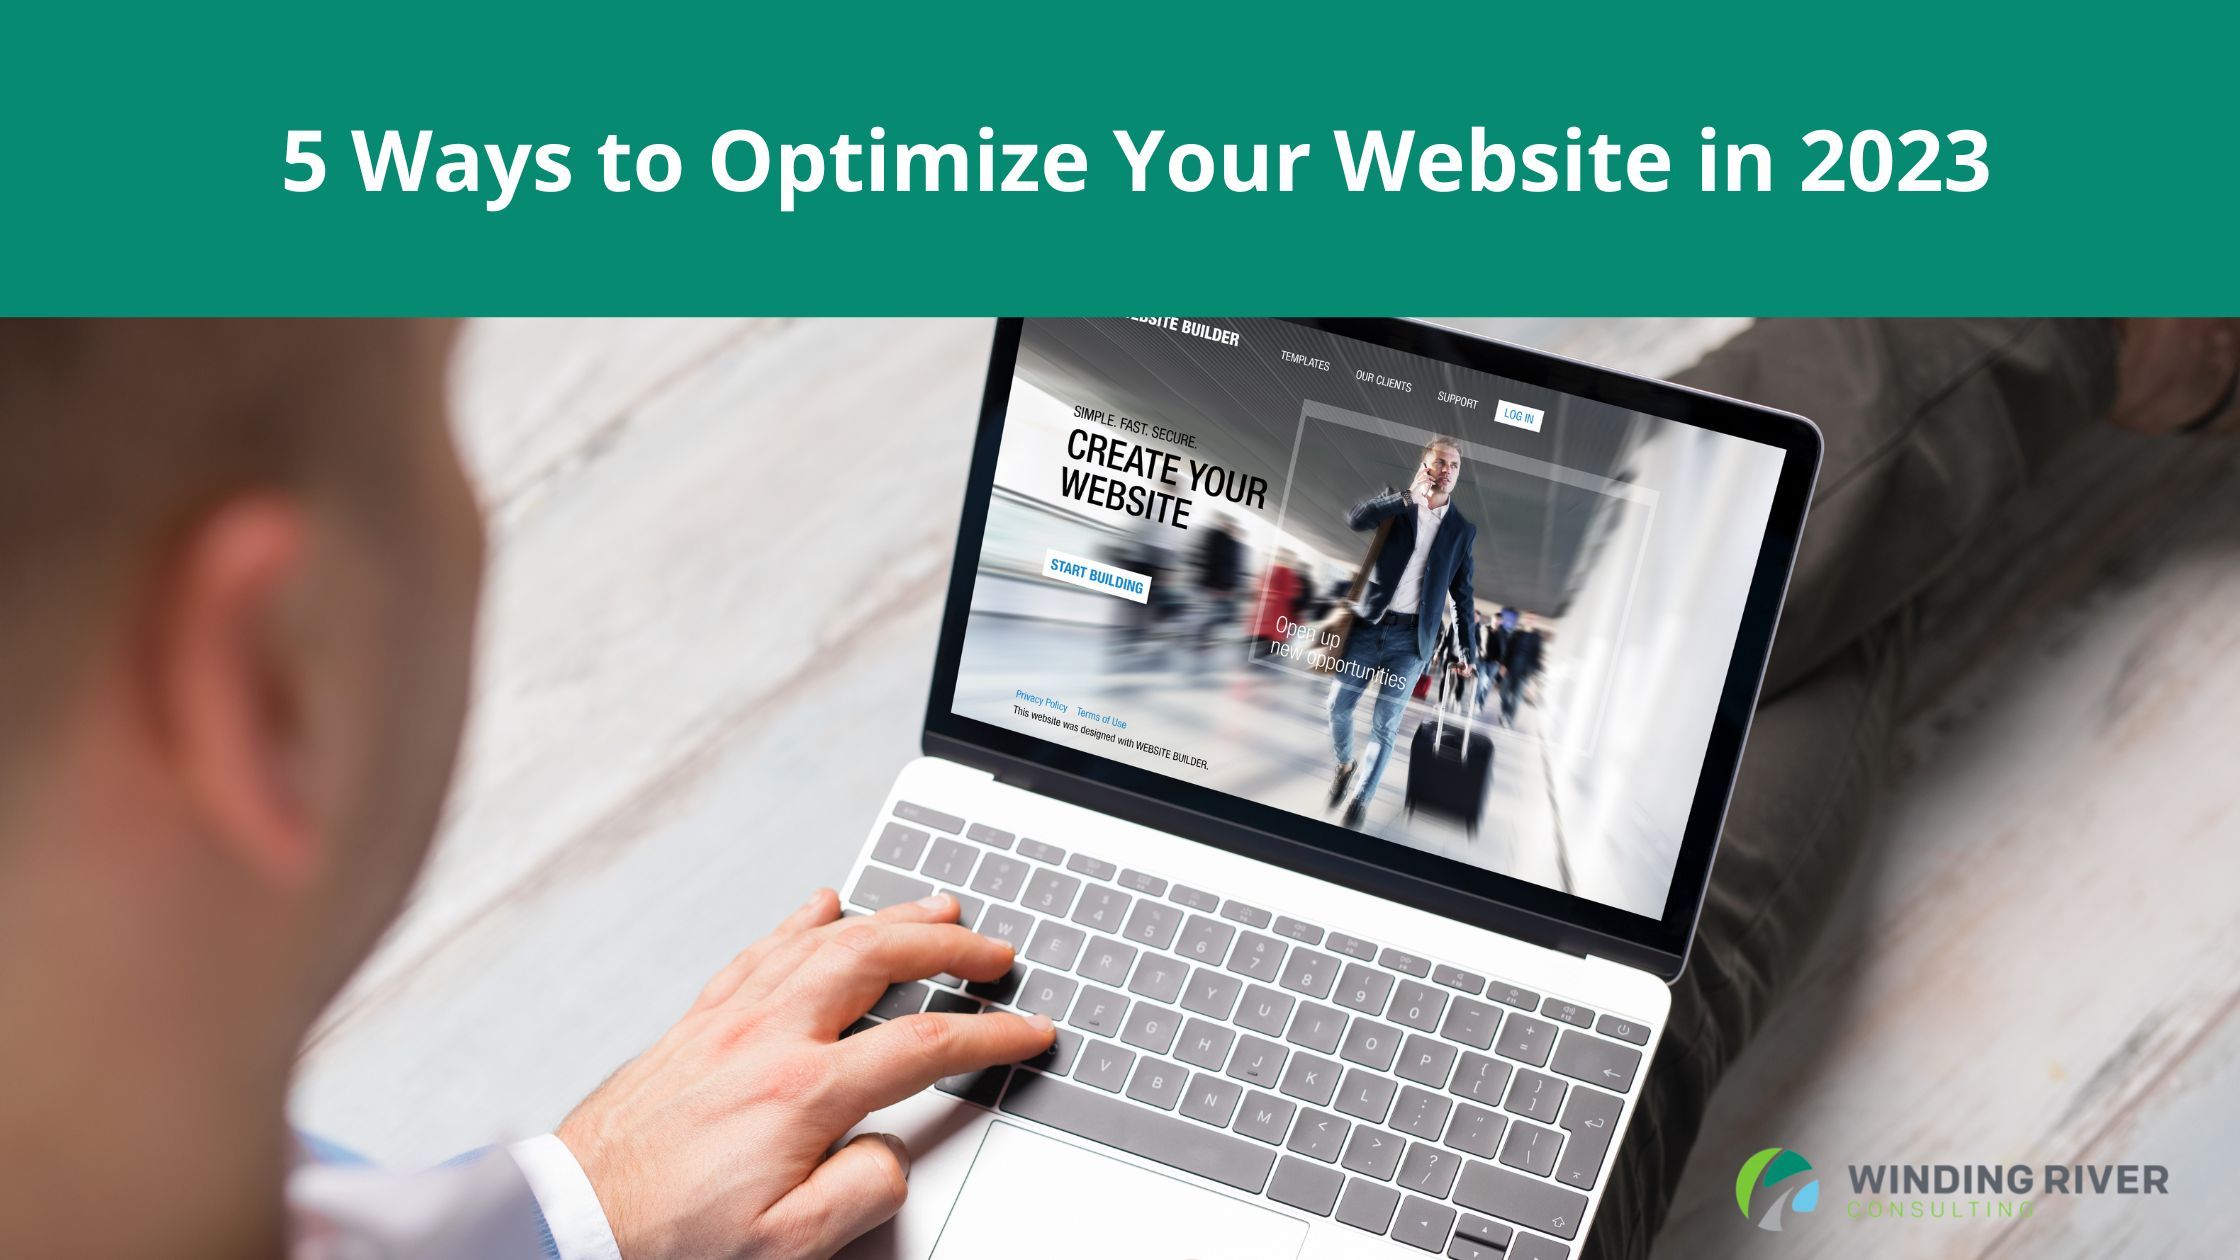 5 Ways to Optimize Your Website in 2023